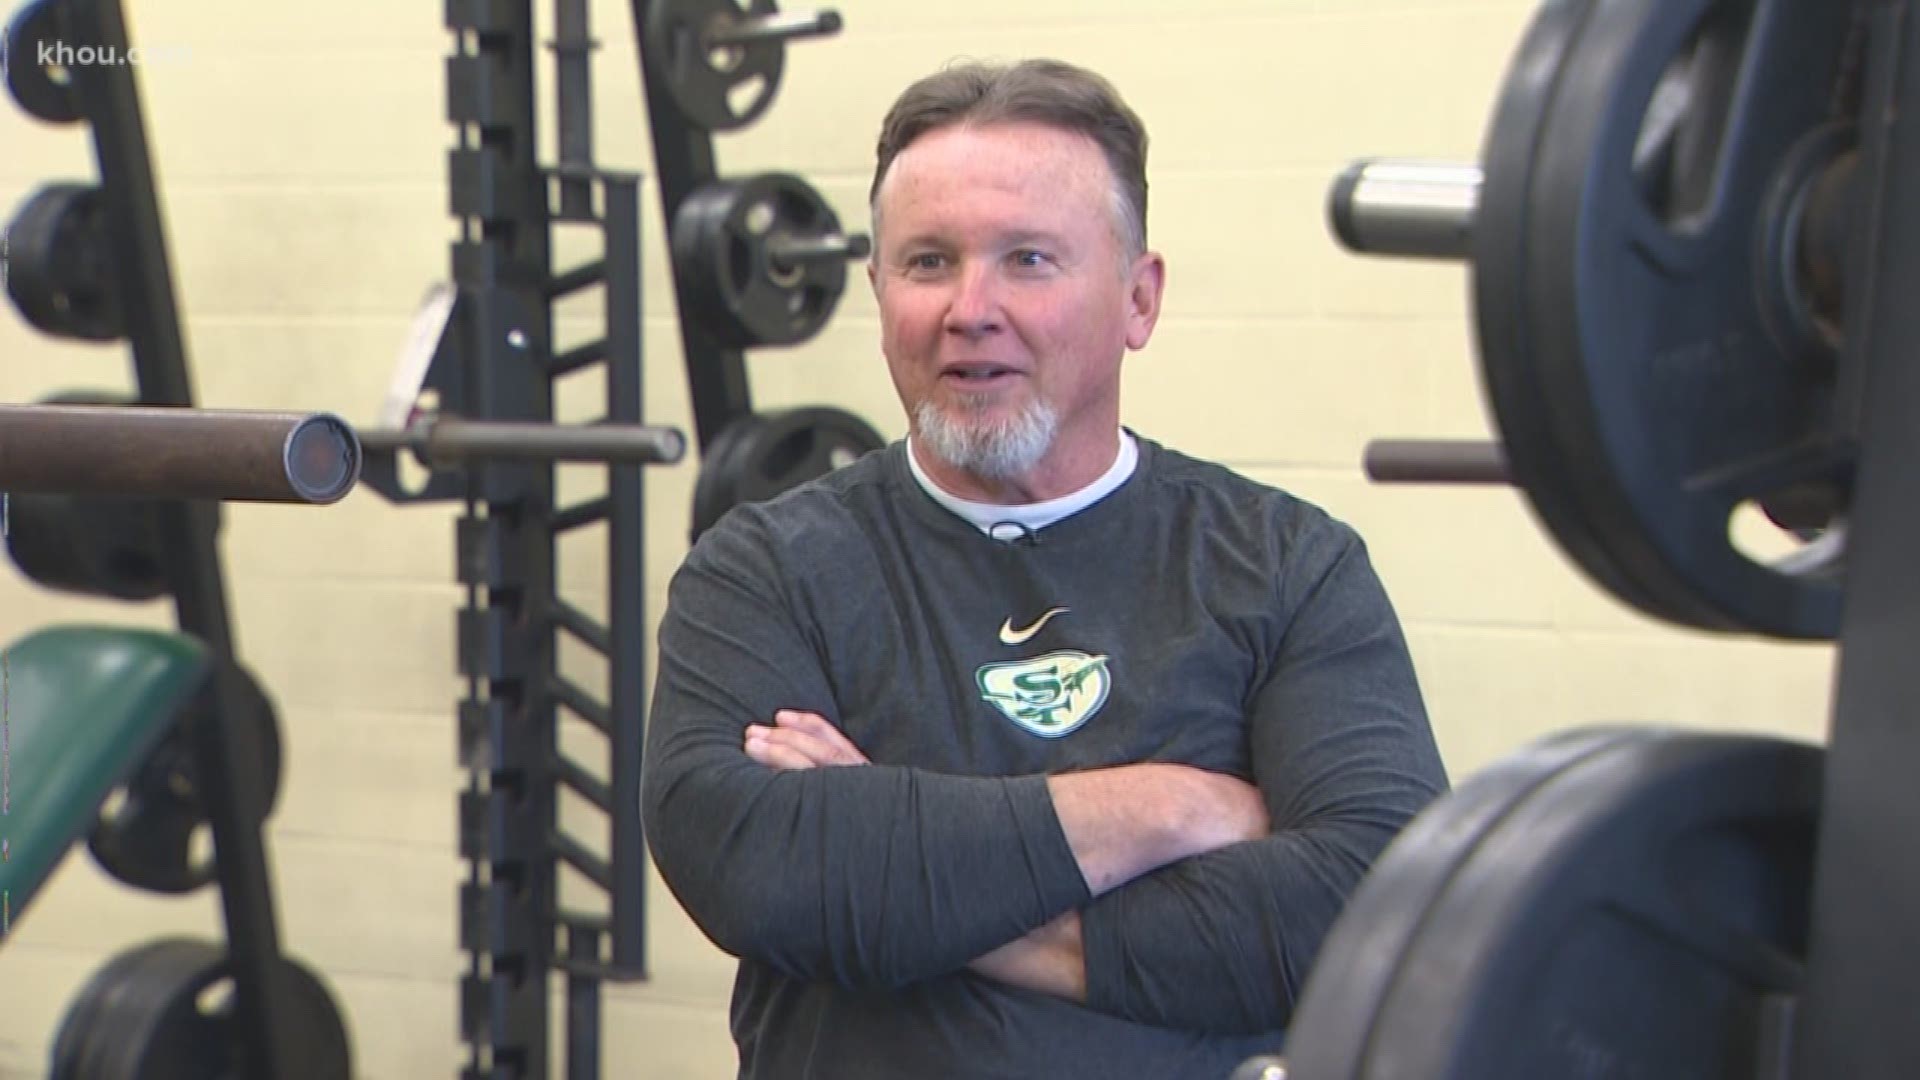 A leader and role model on and off the field, the Santa Fe High School football coach has helped his team overcome a lot. The Houston Texans and the NFL are recognizing Santa Fe High School's head coach Mark Kanipes as a finalist for prestigious Don Shula